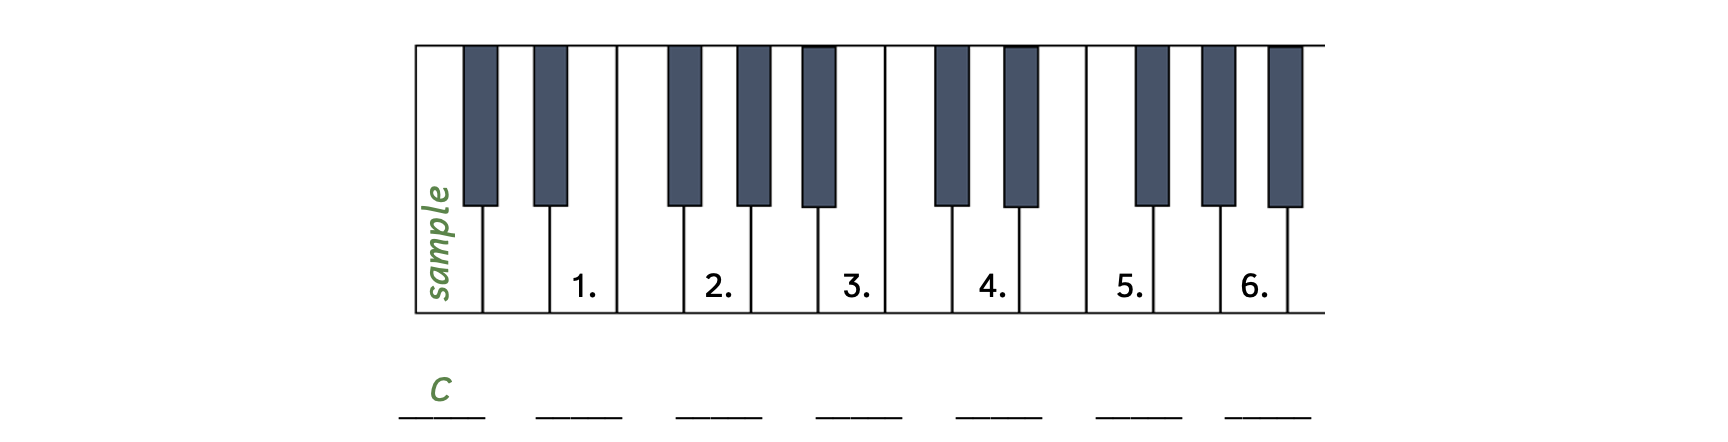 An exercise asking you to identify notes on the keyboard. The sample is pointing to the white key to the left of the two black keys. The sample's answer is C. Number 1 is the white key to the right of the two black keys. Number 2 is two white keys above number 1. Number 3 is the white key to the right of the three black keys. Number 4 is the white key between the two black keys. Number 5 is the white key to the left of the three white keys. Number 6 is two white keys above number 5.